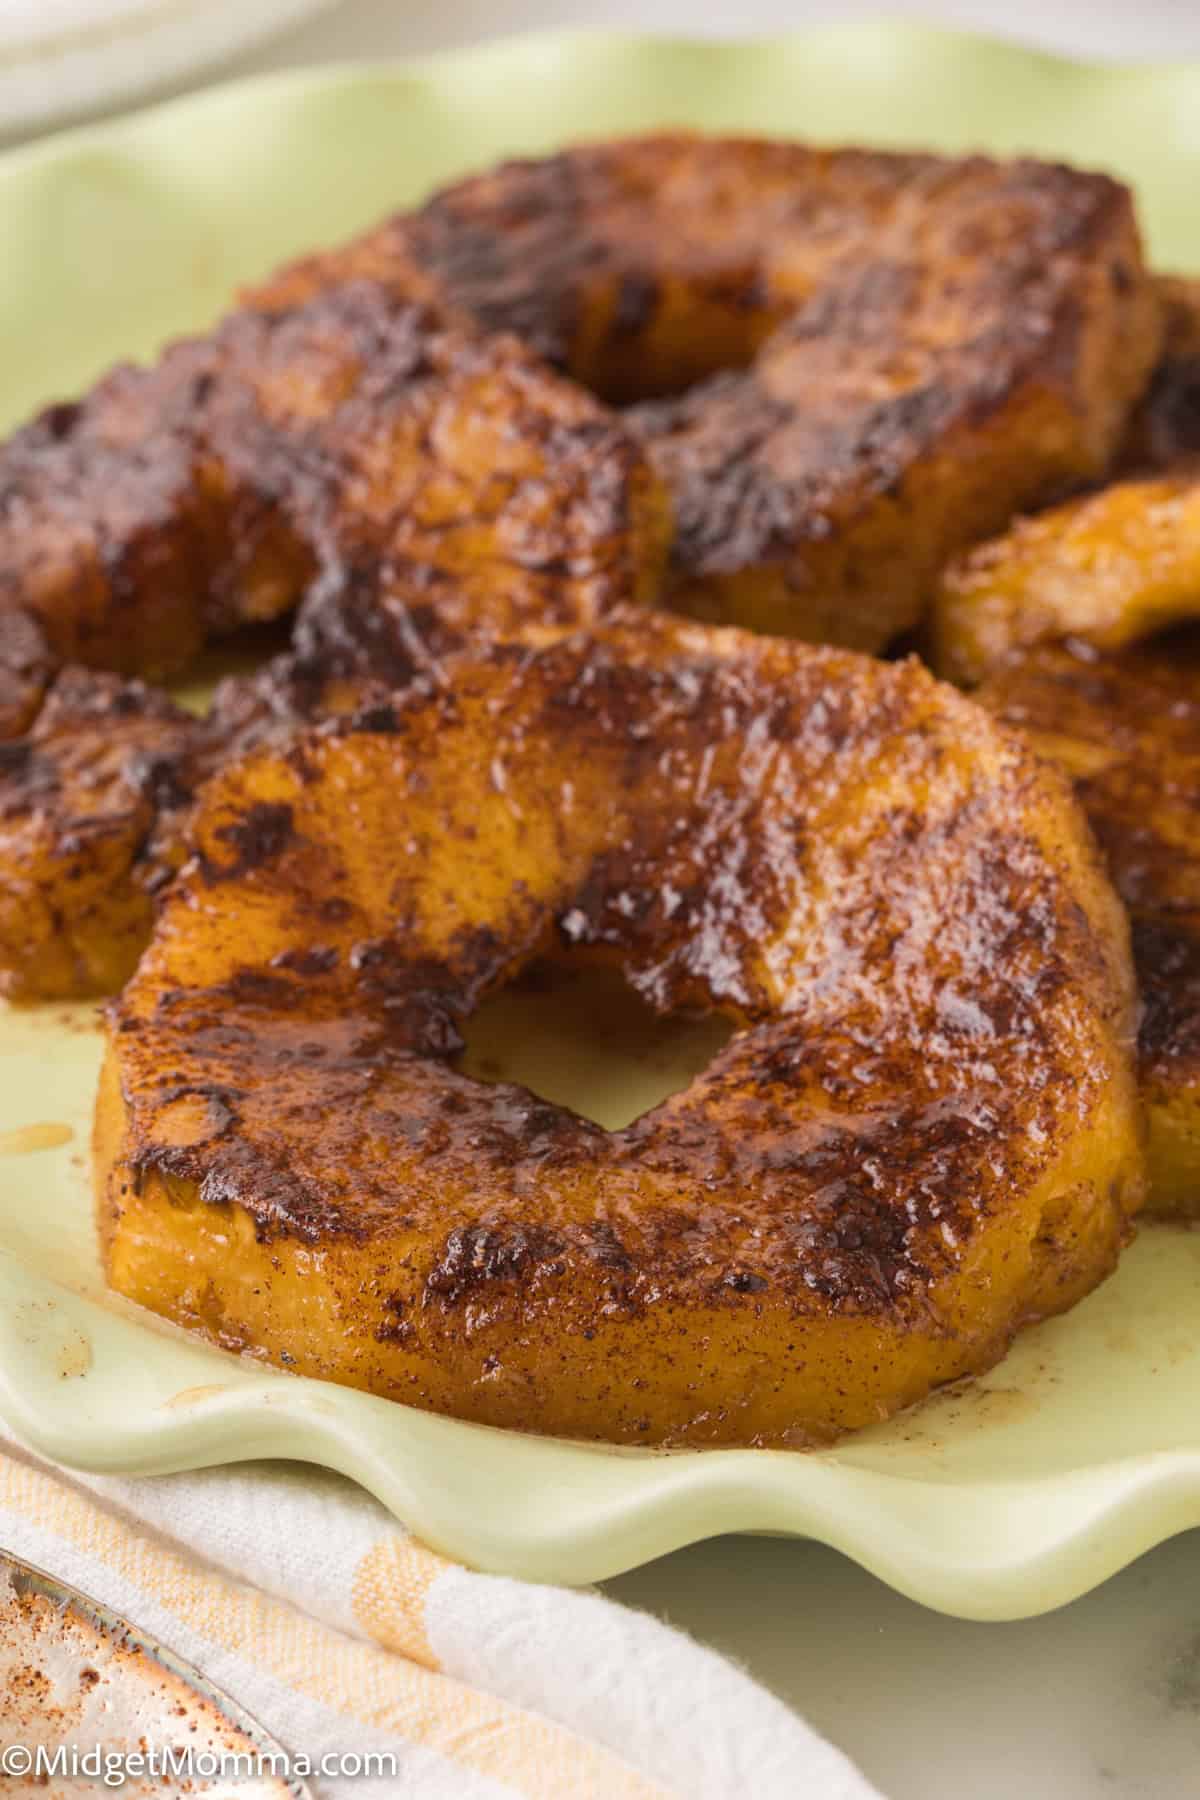 baked cinnamon sugar-coated pineapple rings served on a pale green plate.